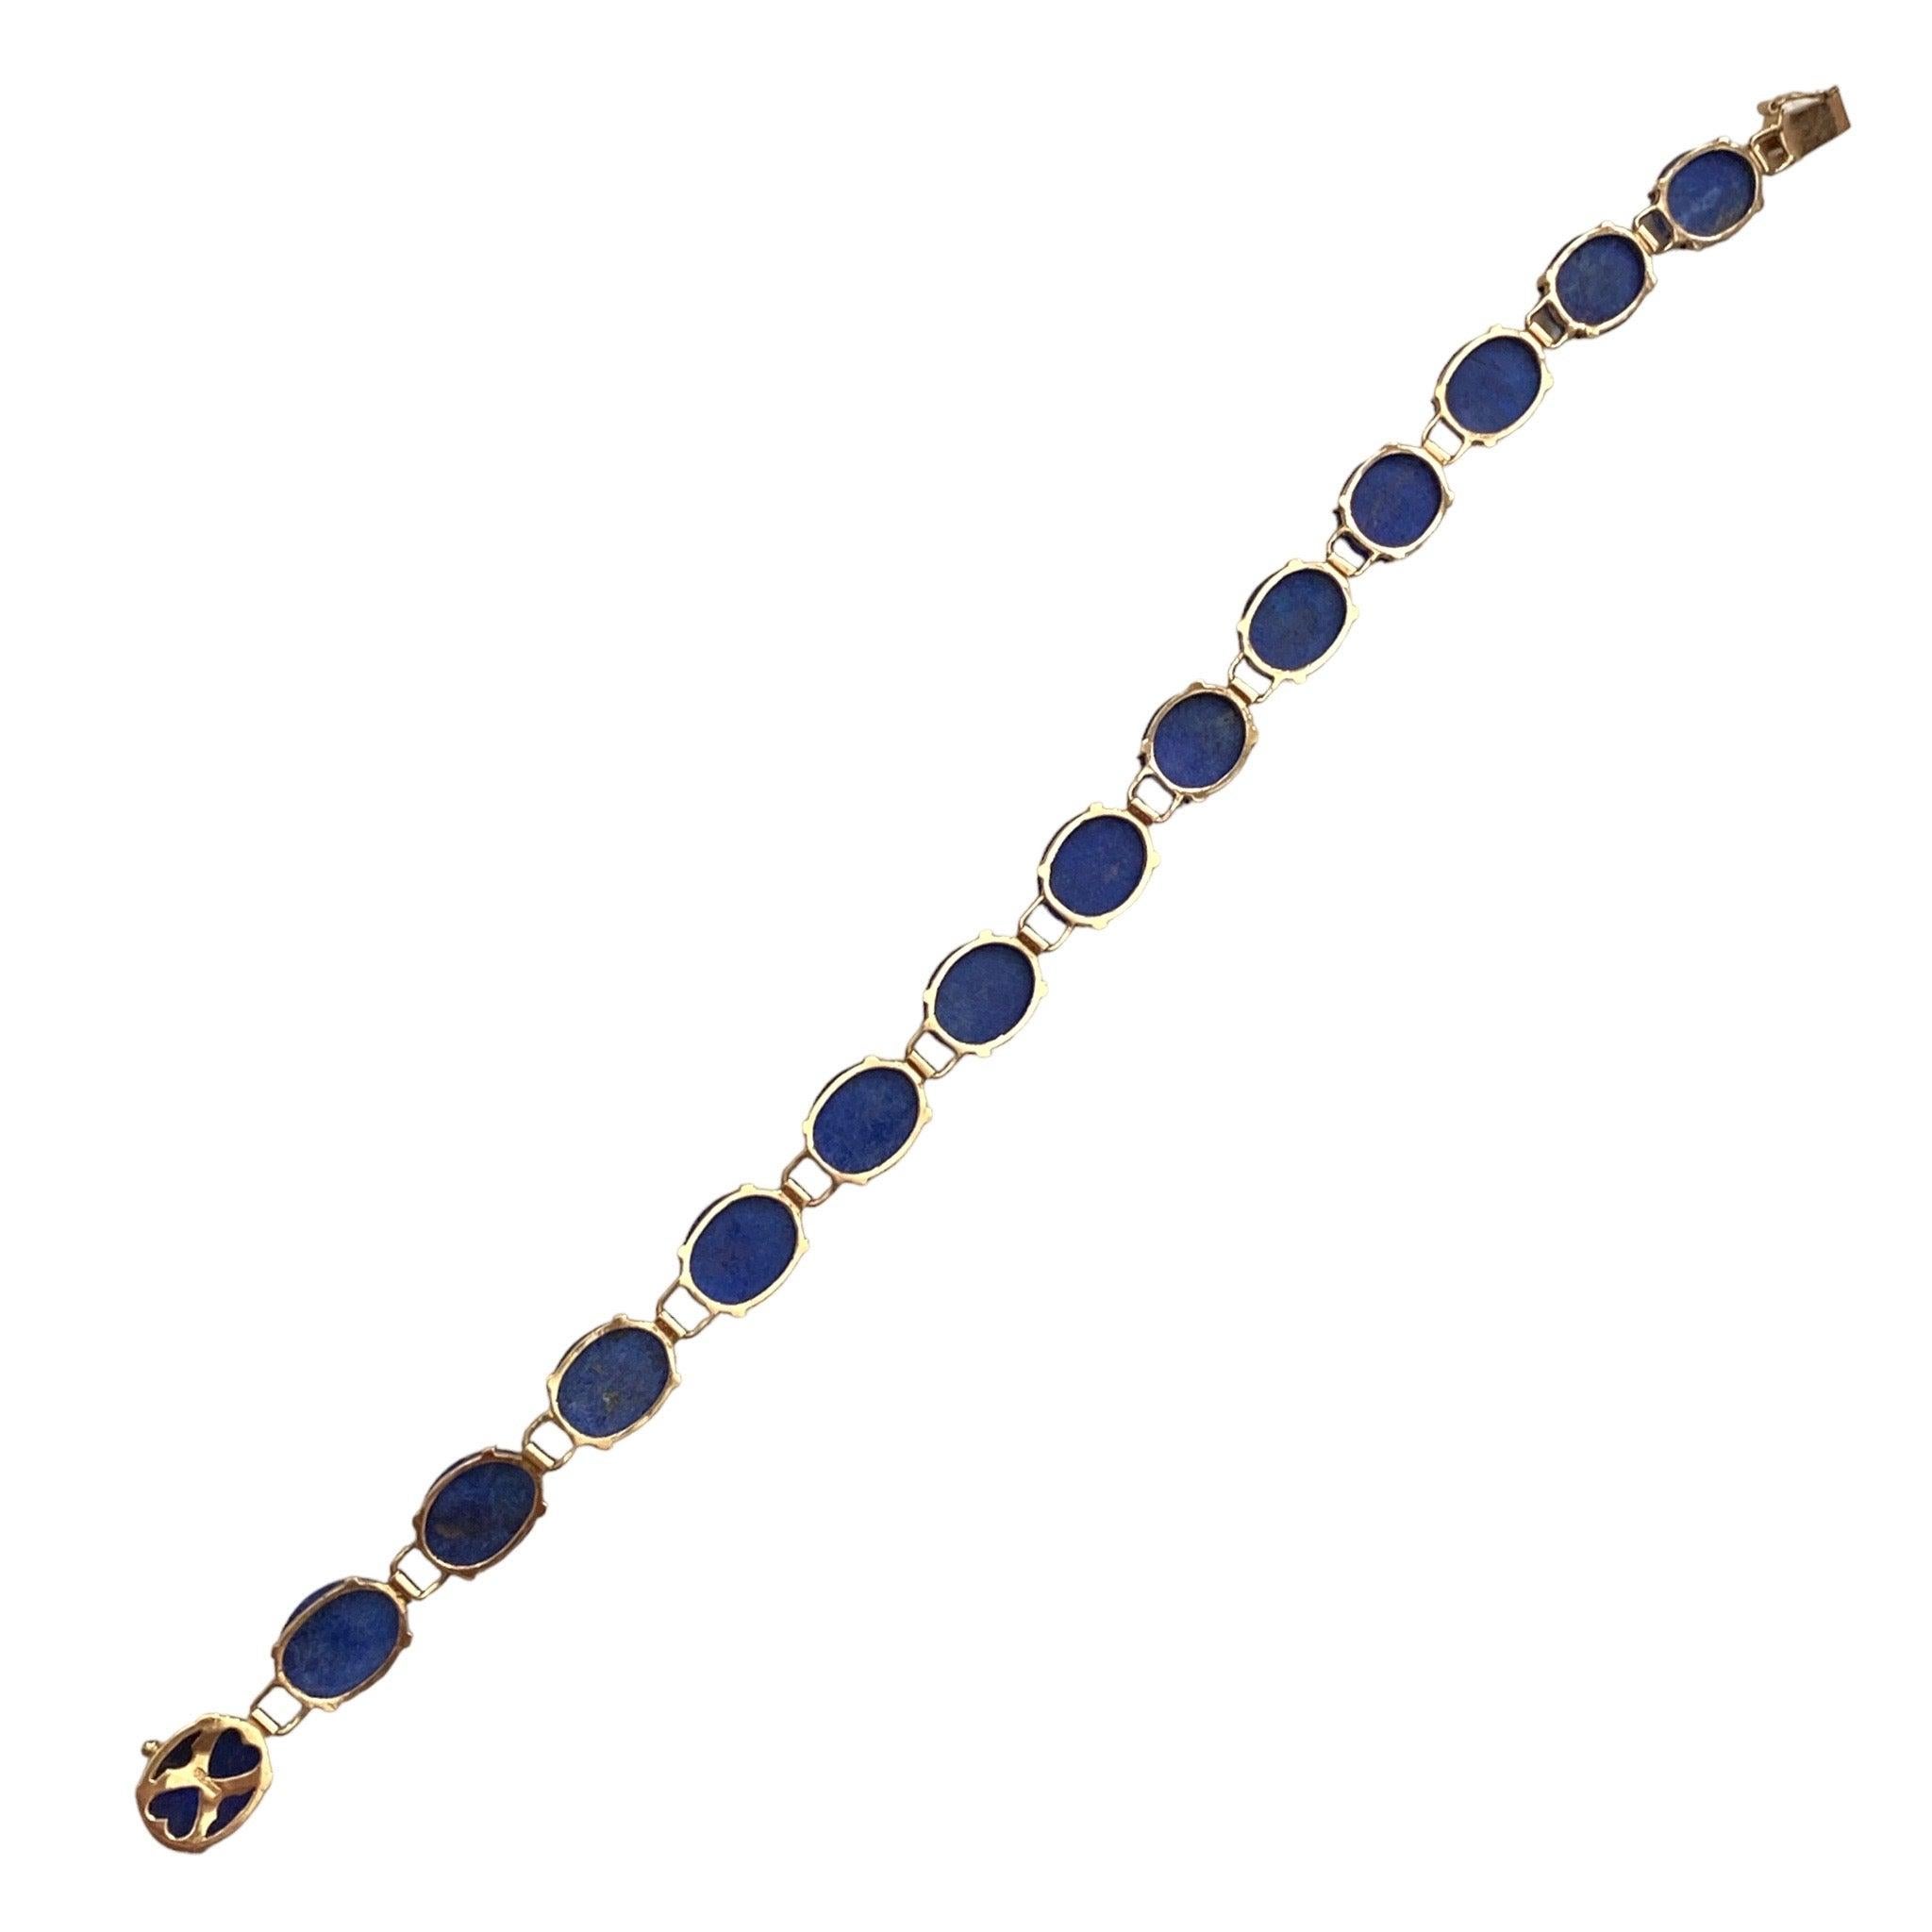 Vintage 14K Yellow Gold Lapis Lazuli Bracelet In Good Condition For Sale In Henderson, NV